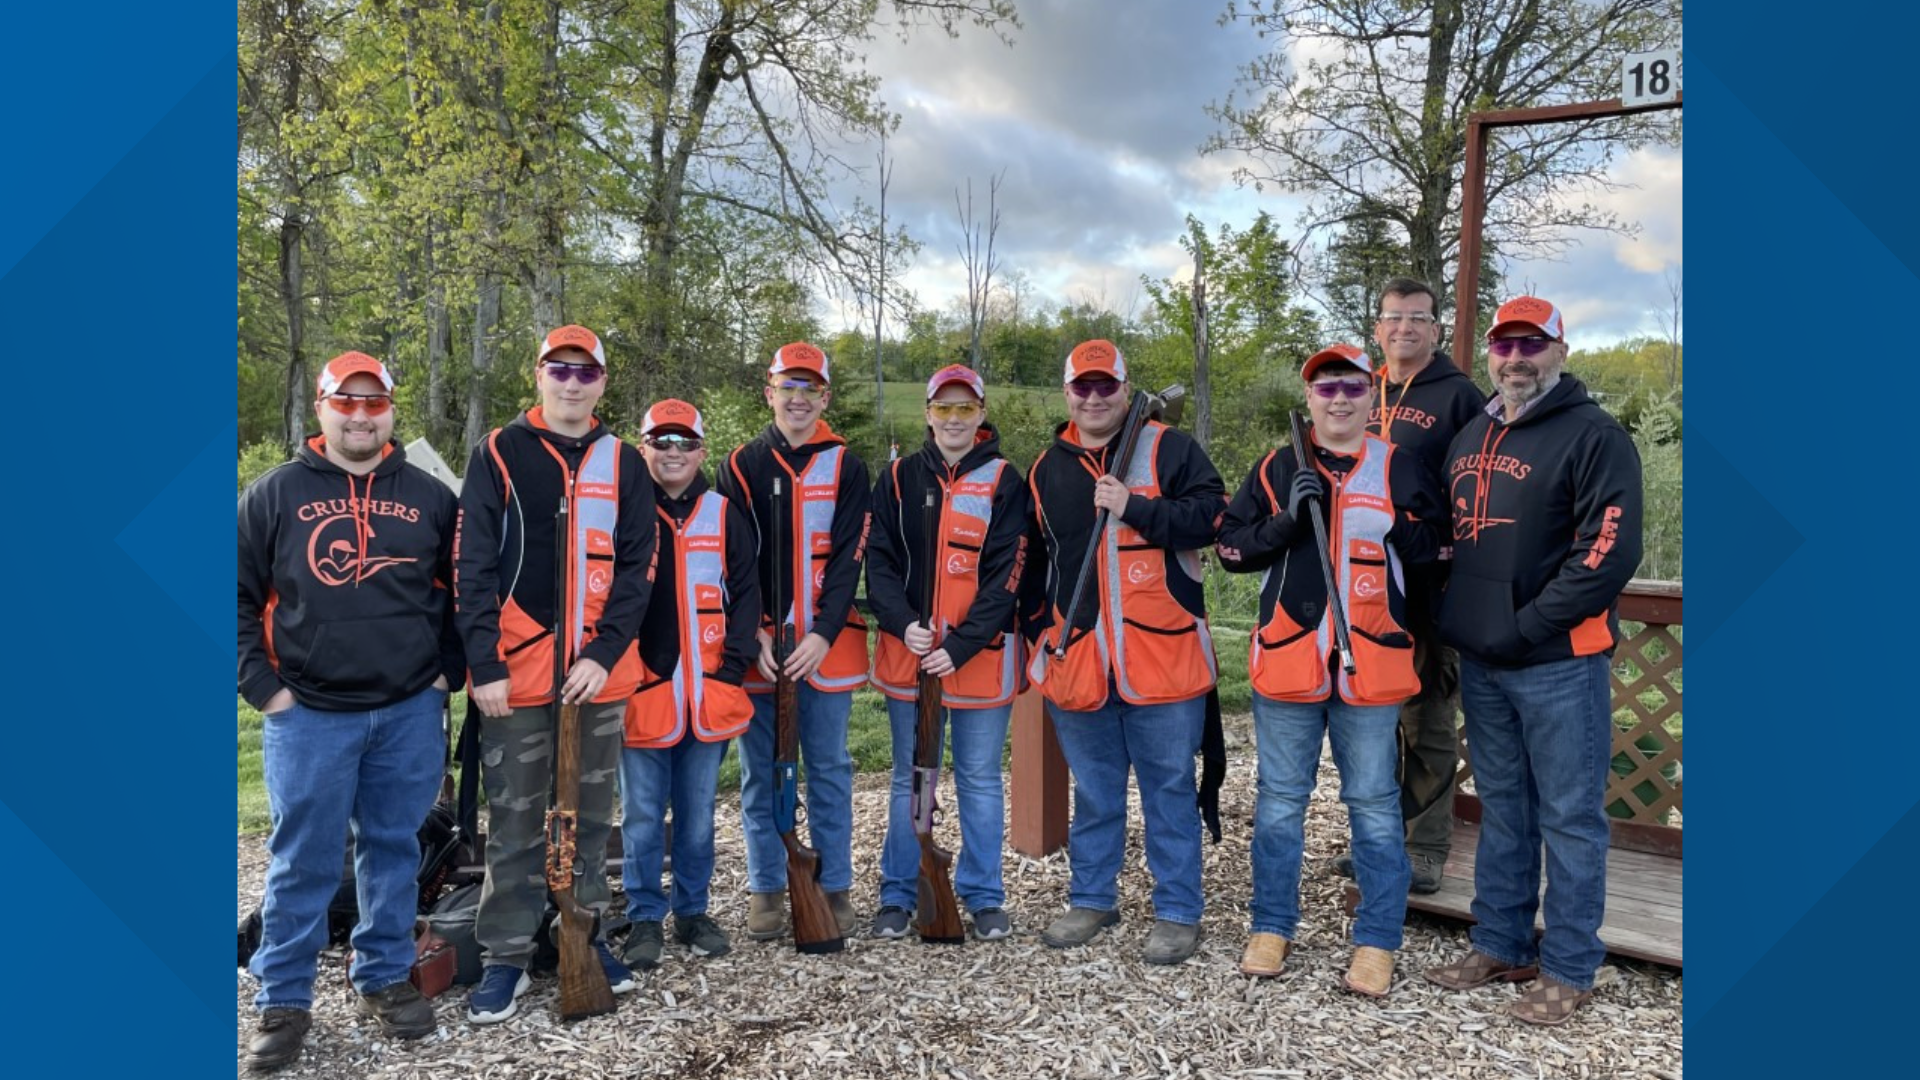 The youth clay shooting team is training for nationals while using the sport to develop skills in young adults, with safety at the forefront.